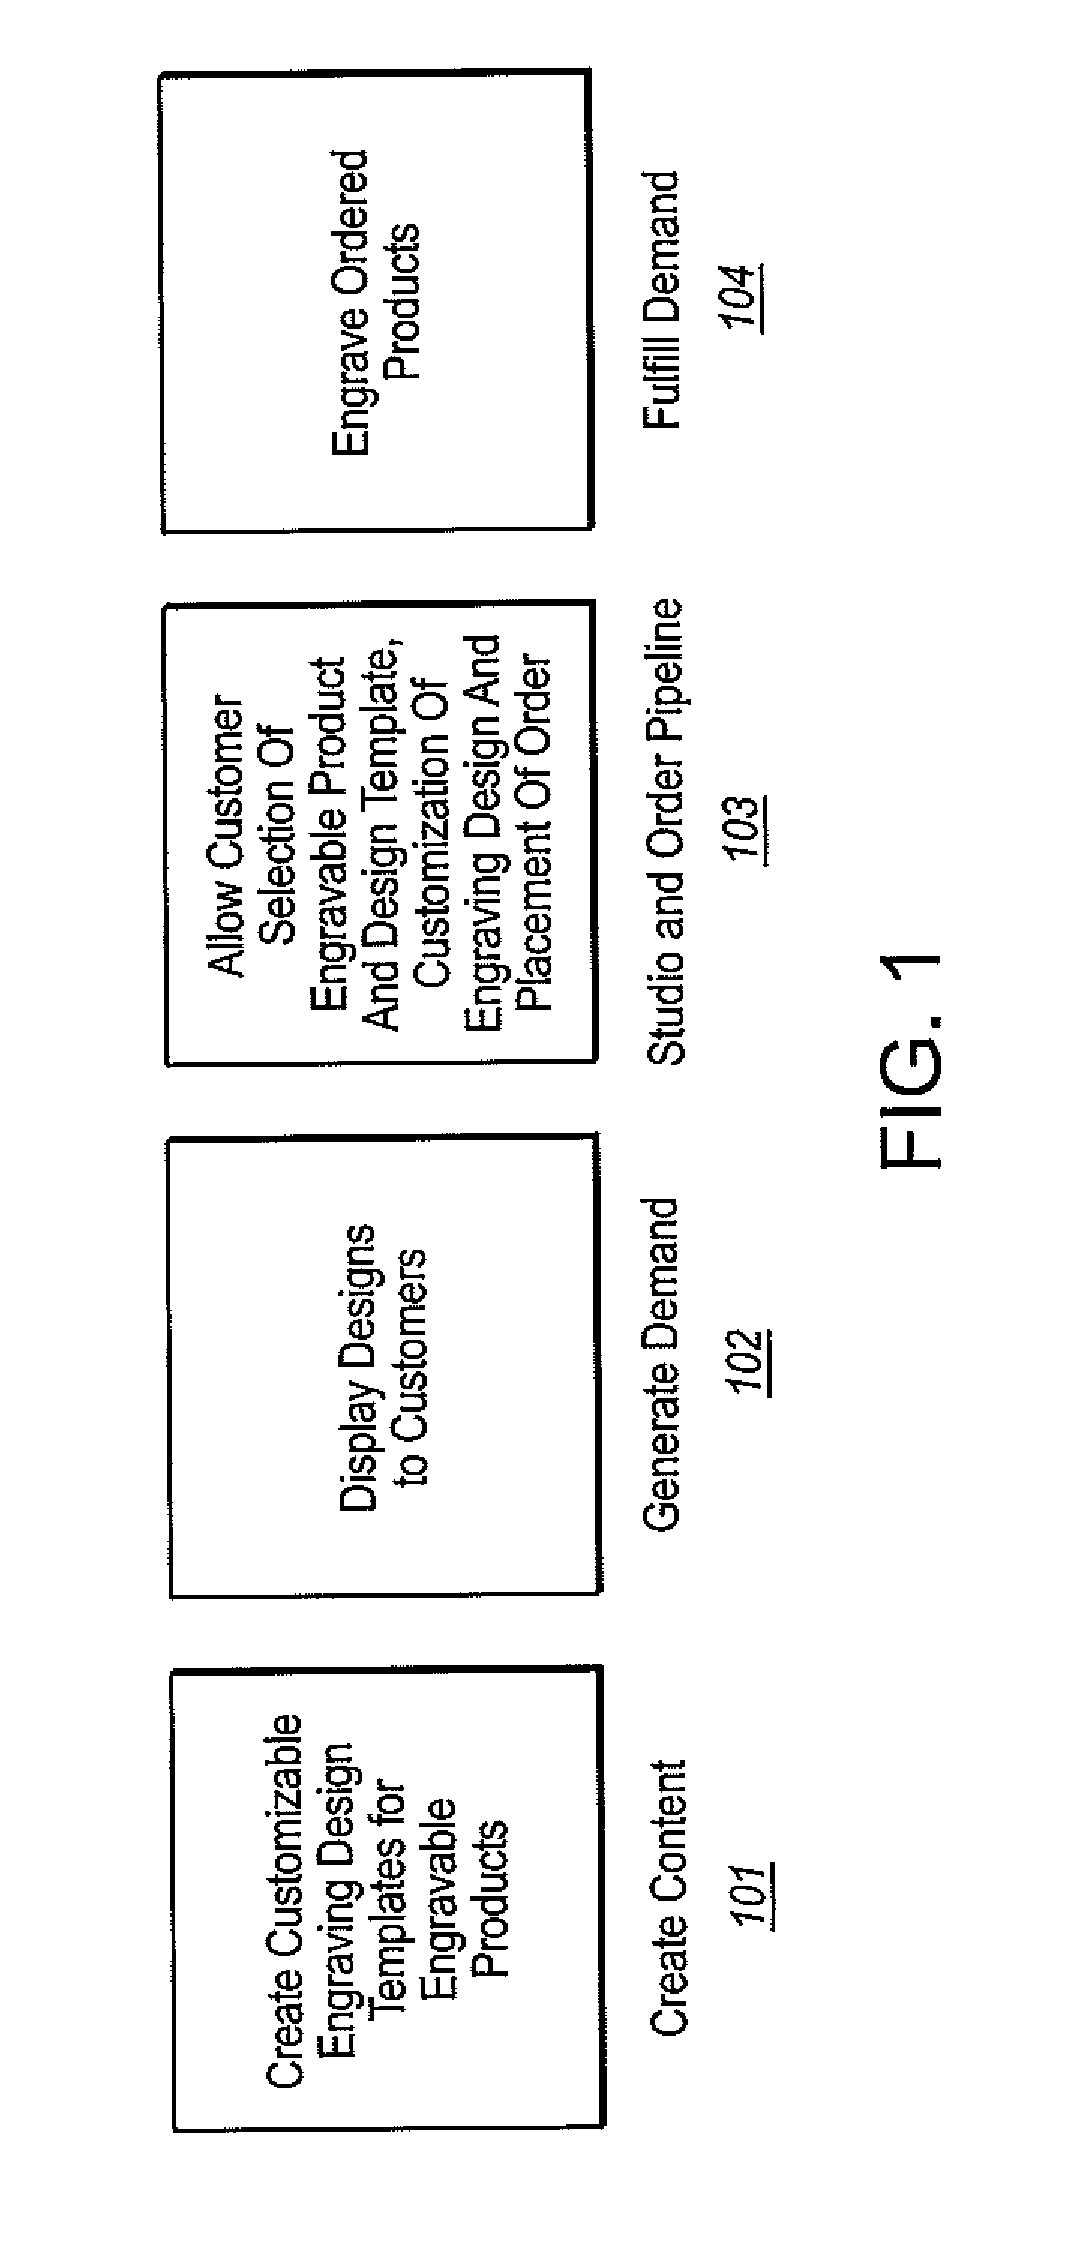 Method and system for mass production of customized engraved products